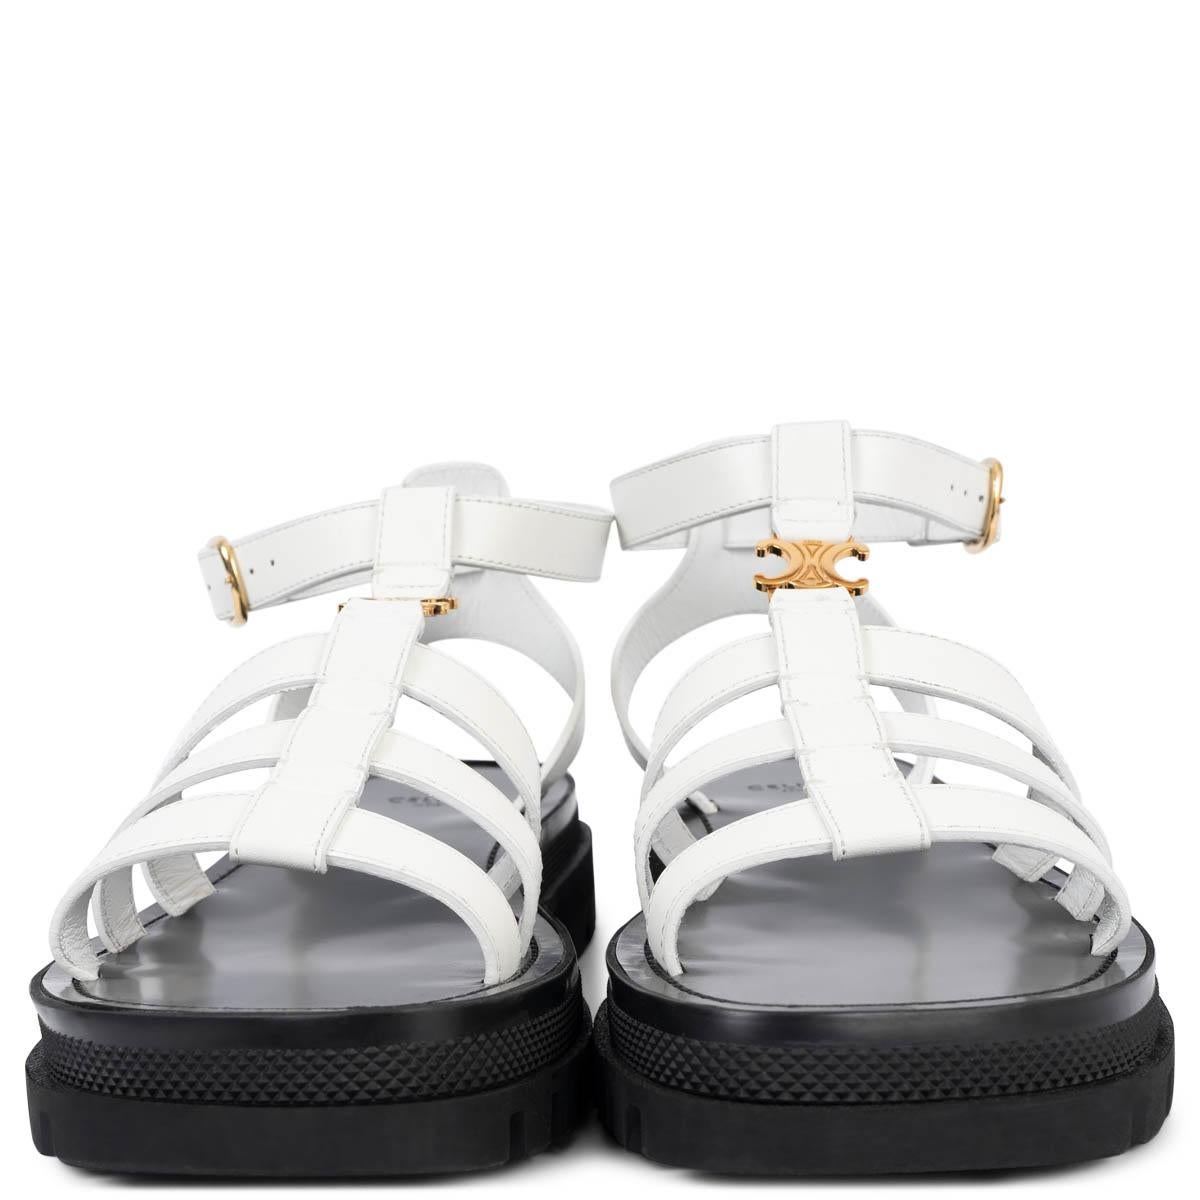 100% authentic Celine Clea Triomphe chunky gladiator sandals in white leather set on a black rubber sole featuring gold-tone hardware. Brand new. Come with dust bags. 

Measurements
Imprinted Size	41 fit 40.5
Shoe Size	40.5
Inside Sole	27.5cm